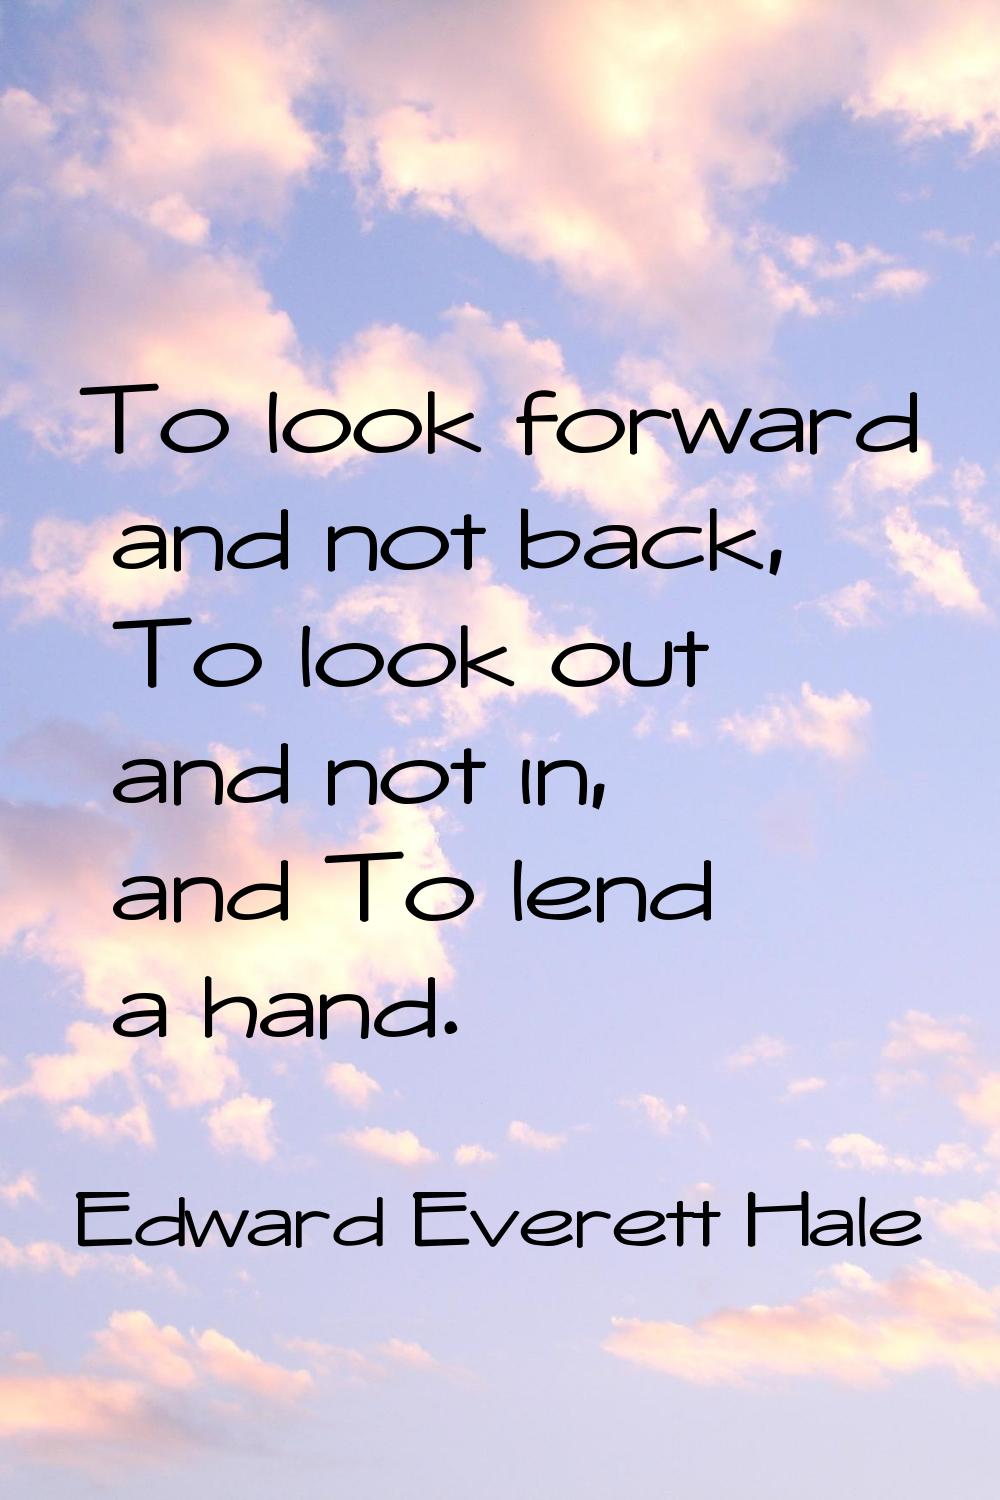 To look forward and not back, To look out and not in, and To lend a hand.